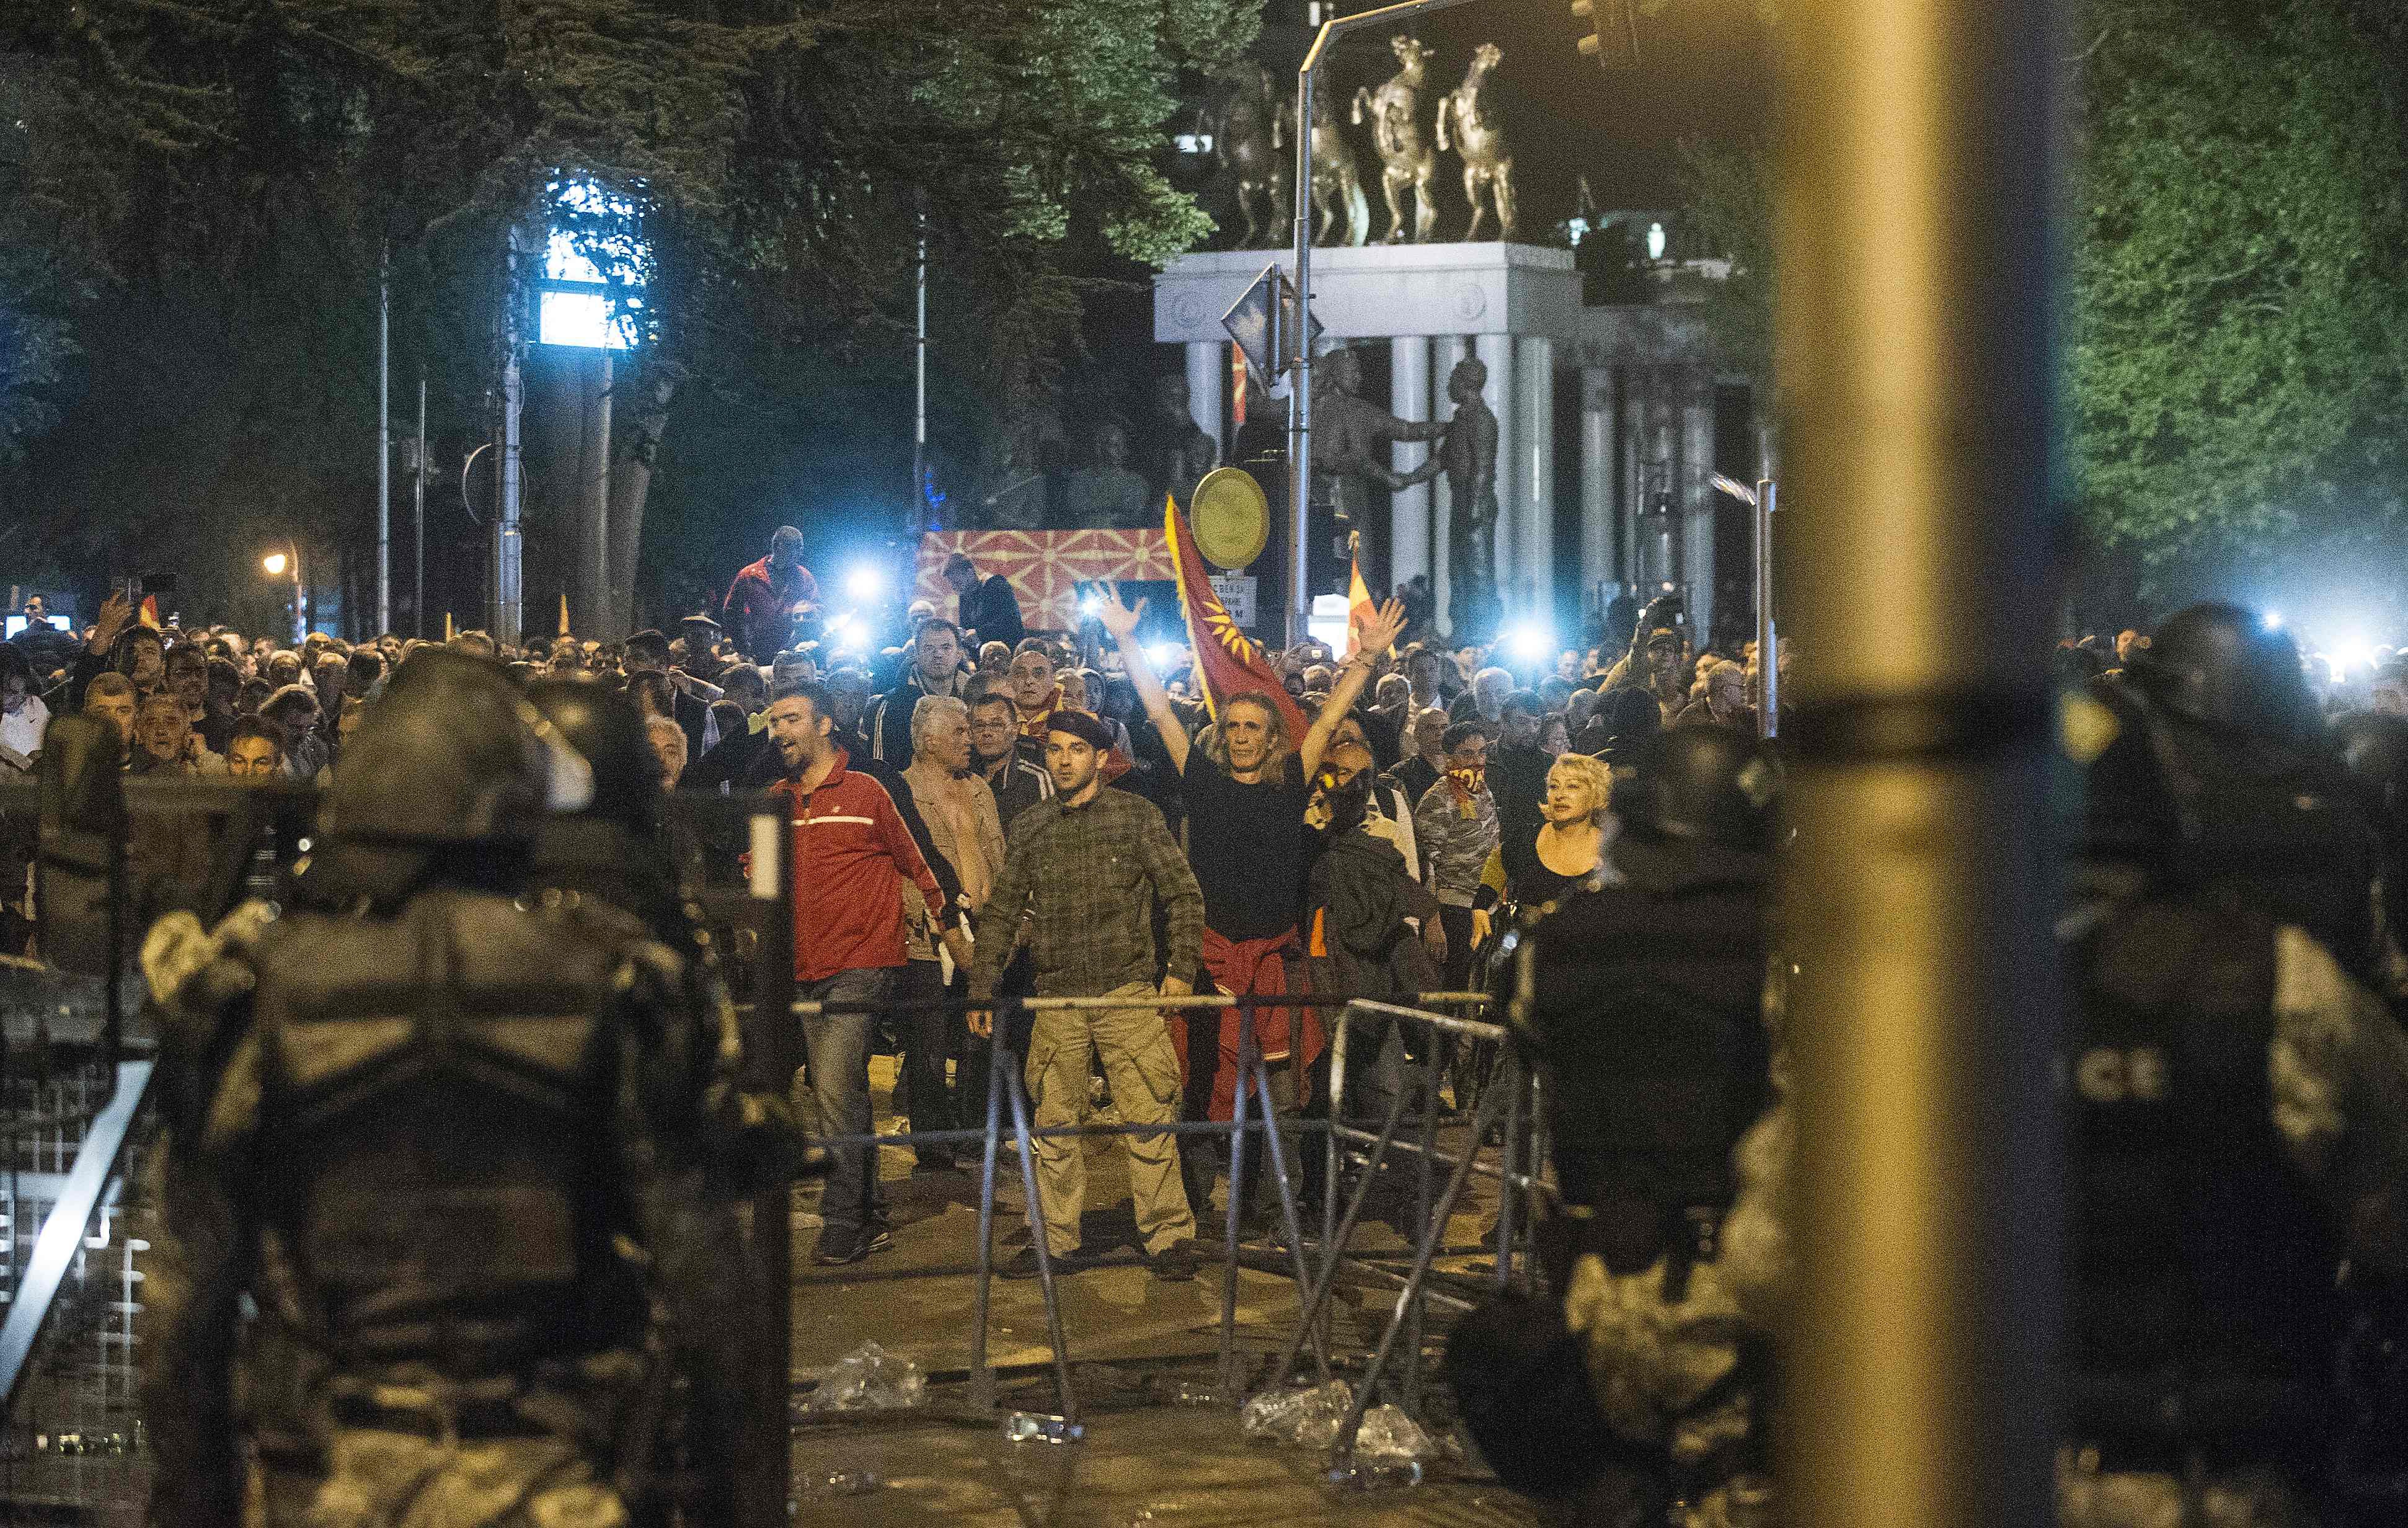 Police face protesters gathered outside Macedonia's parliament after the governing Social Democrats and ethnic Albanian parties voted to elect an Albanian as parliament speaker in Skopje on April 27, 2017. Macedonia's opposition leader was among at least 10 people injured in parliament on April 27 after protesters stormed the building following an allegedly unfair vote for a parliamentary speaker, witnesses and local media reported. The violence erupted after around 100 protesters supporting the rival VMRO-DPMNE party entered parliament waving Macedonian flags and singing the national anthem. / AFP PHOTO / Robert ATANASOVSKI / TT / kod 444